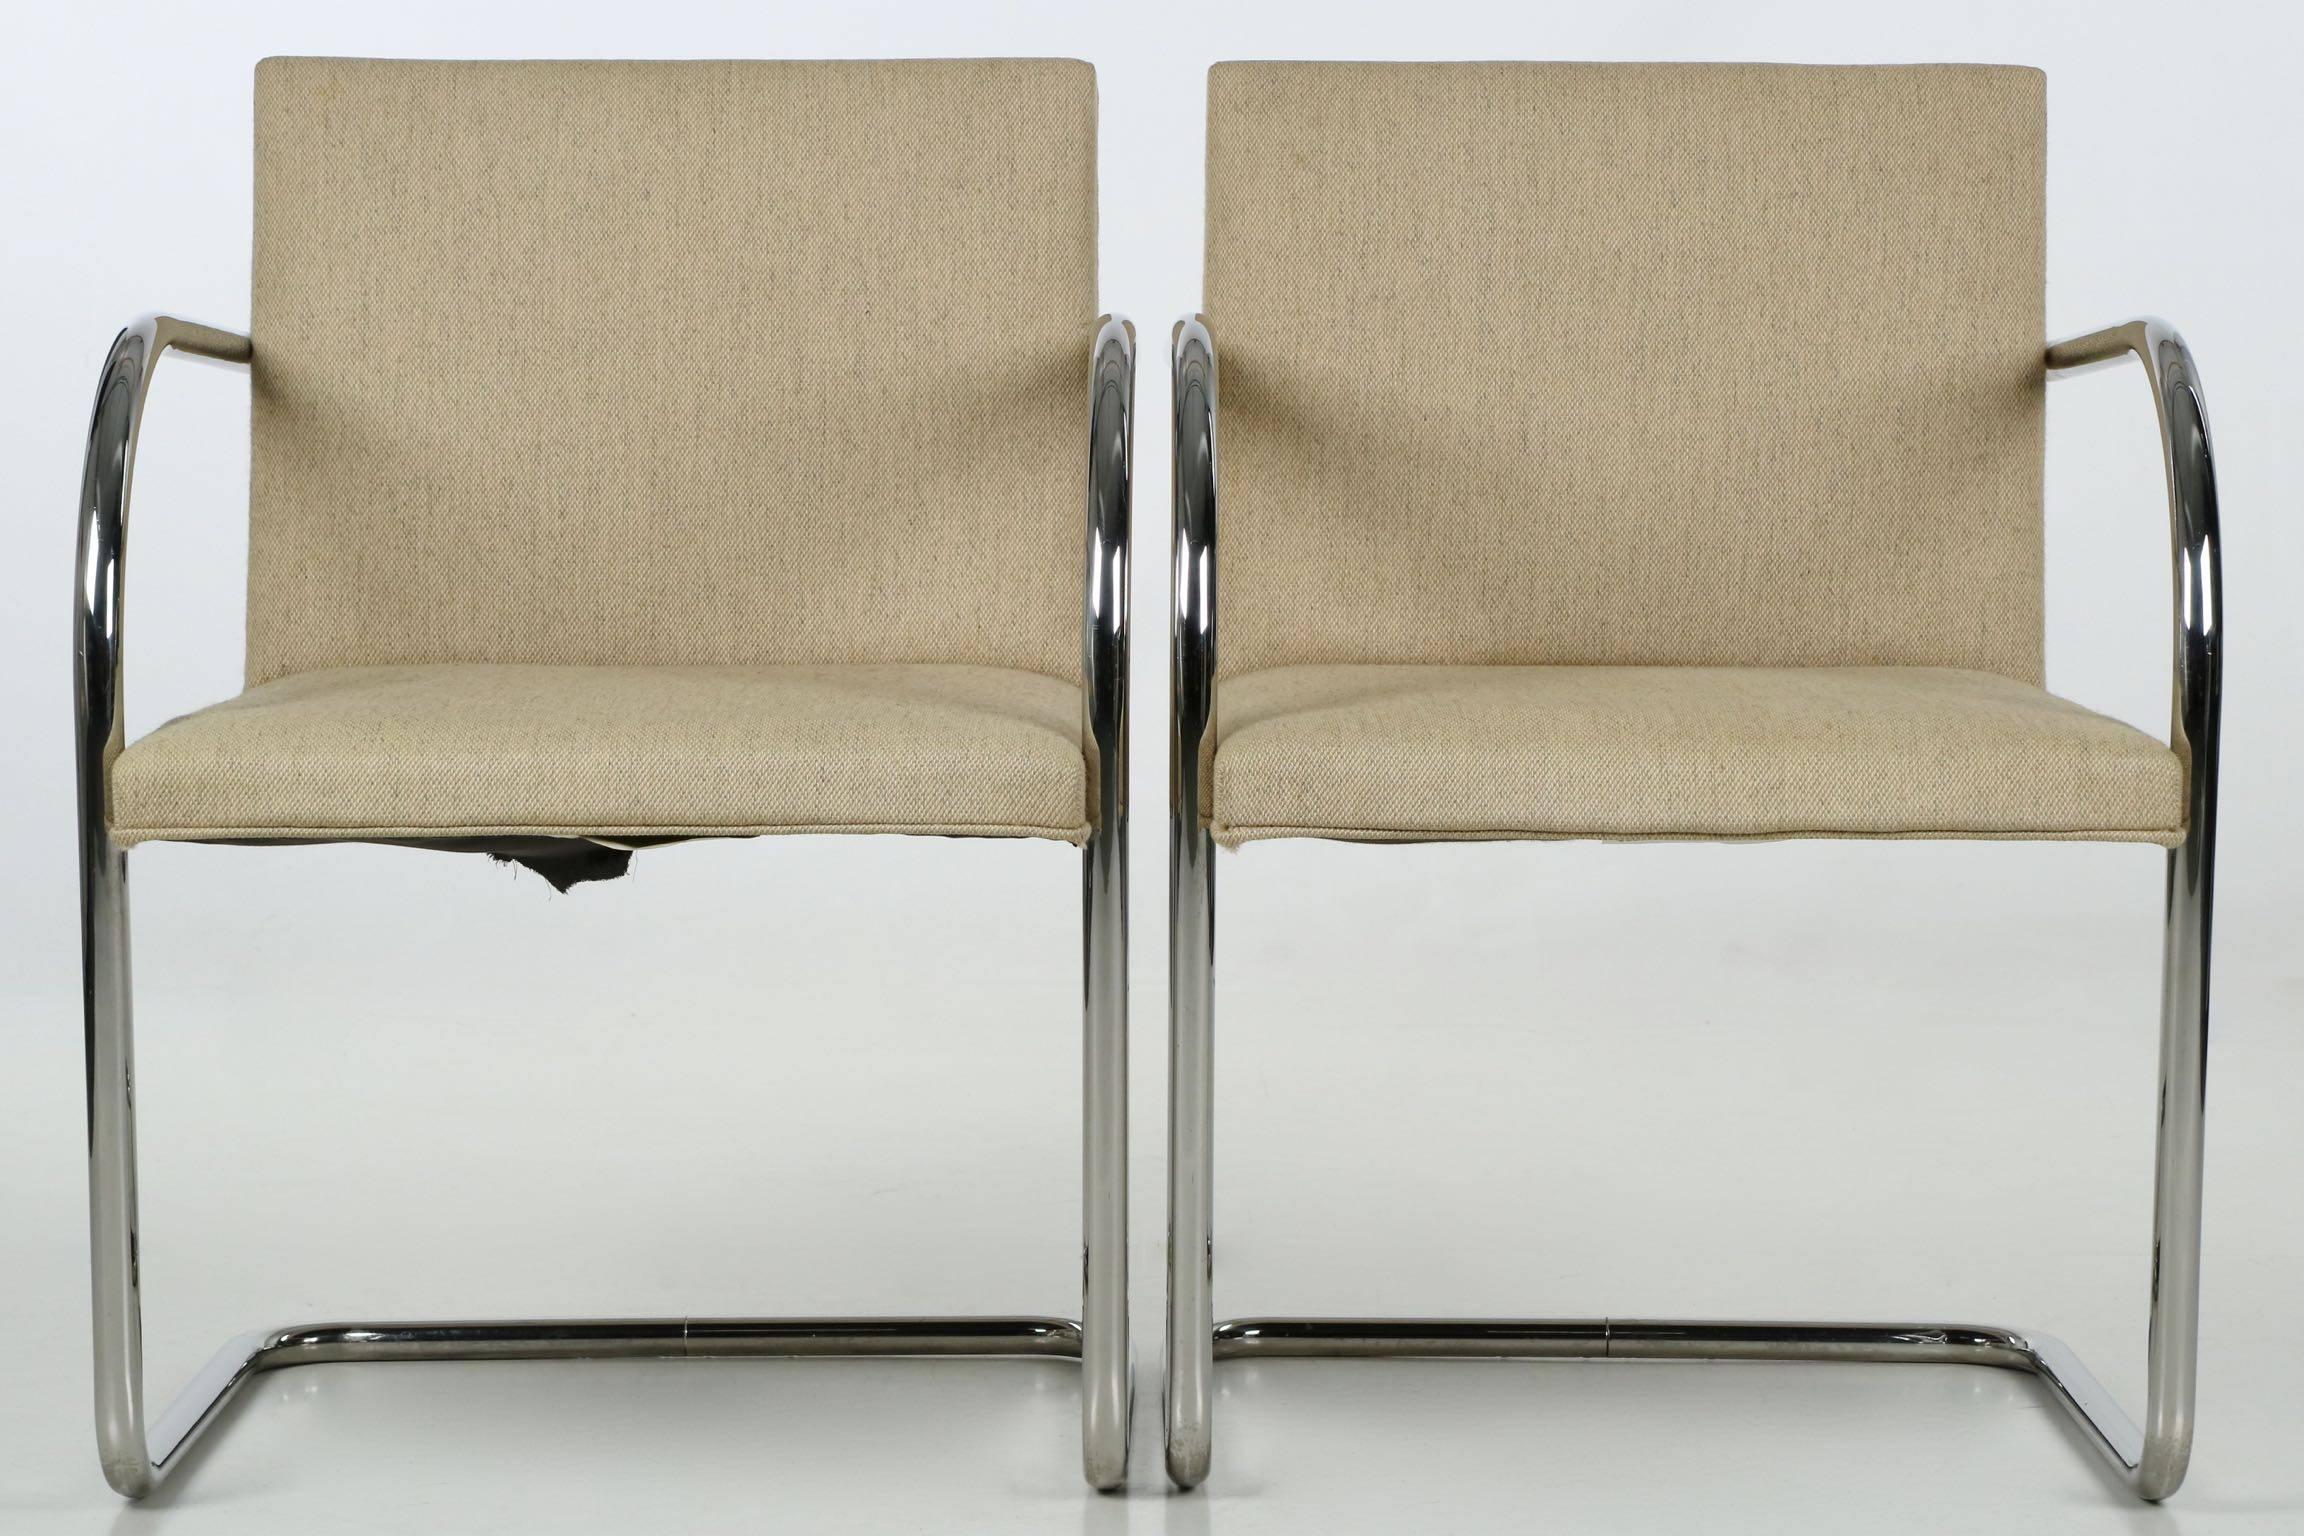 This gorgeous set of six Knoll International, Inc. chrome tubular steel cantilever dining chairs have long achieved iconic status, the brainchild of Ludwig Mies van der Rohe and a form that has remained highly desirable since they were introduced in